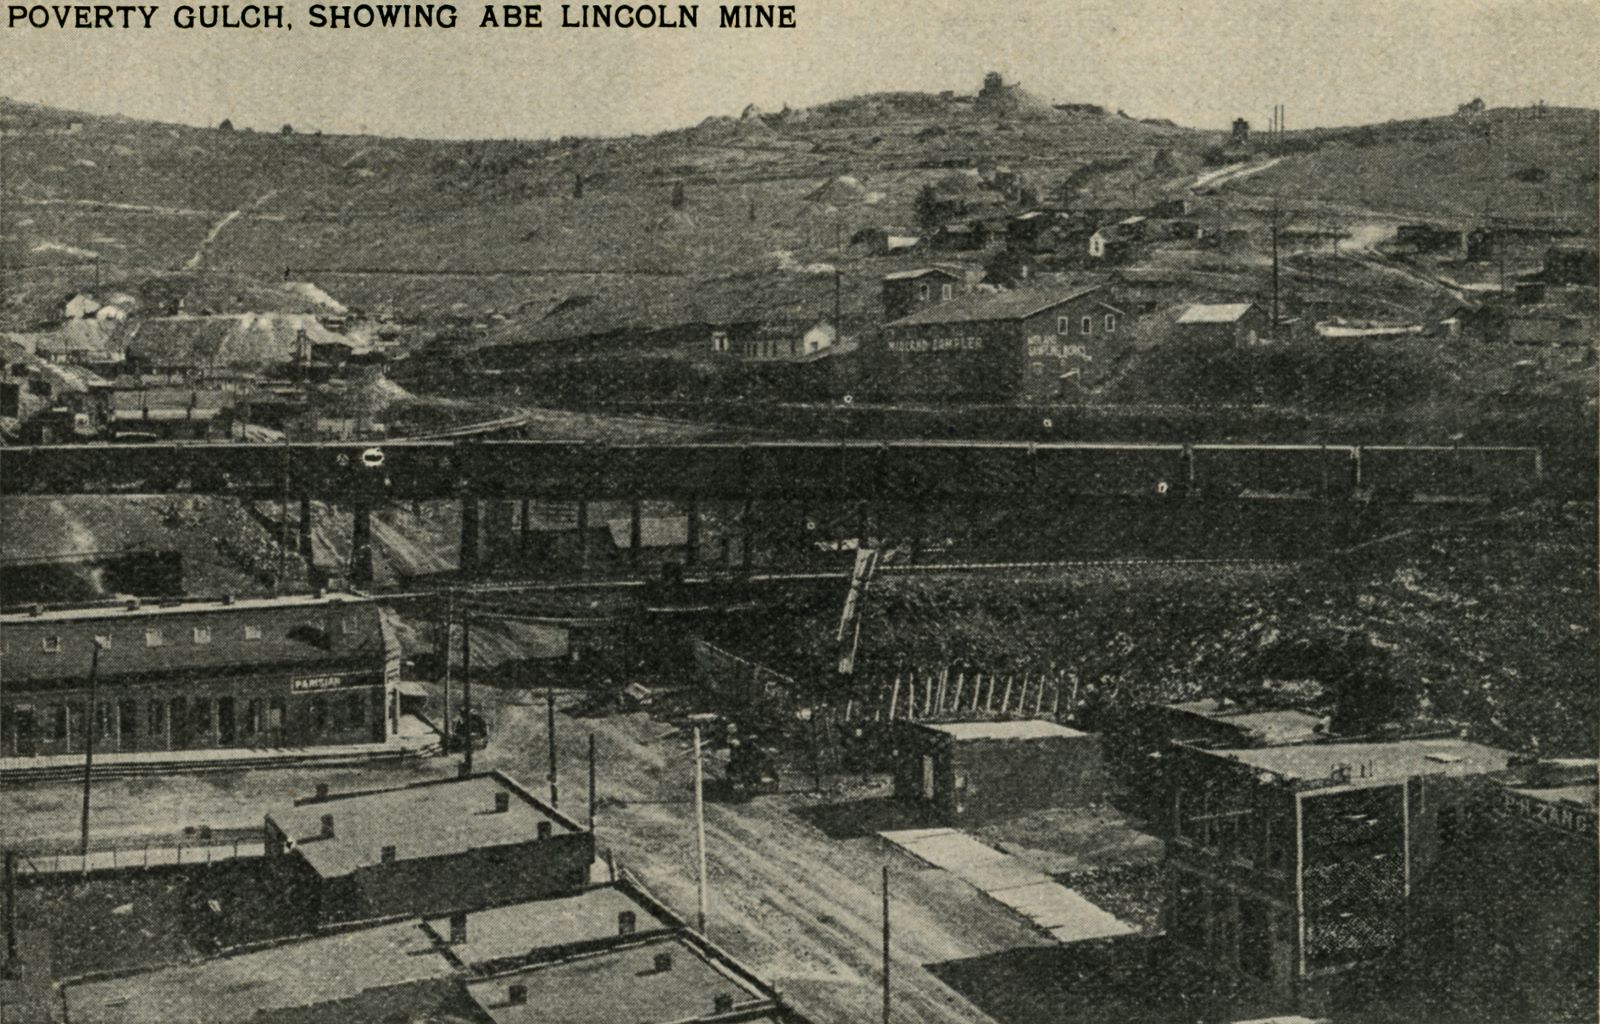 Poverty Gulch, Showing Abe Lincoln Mine